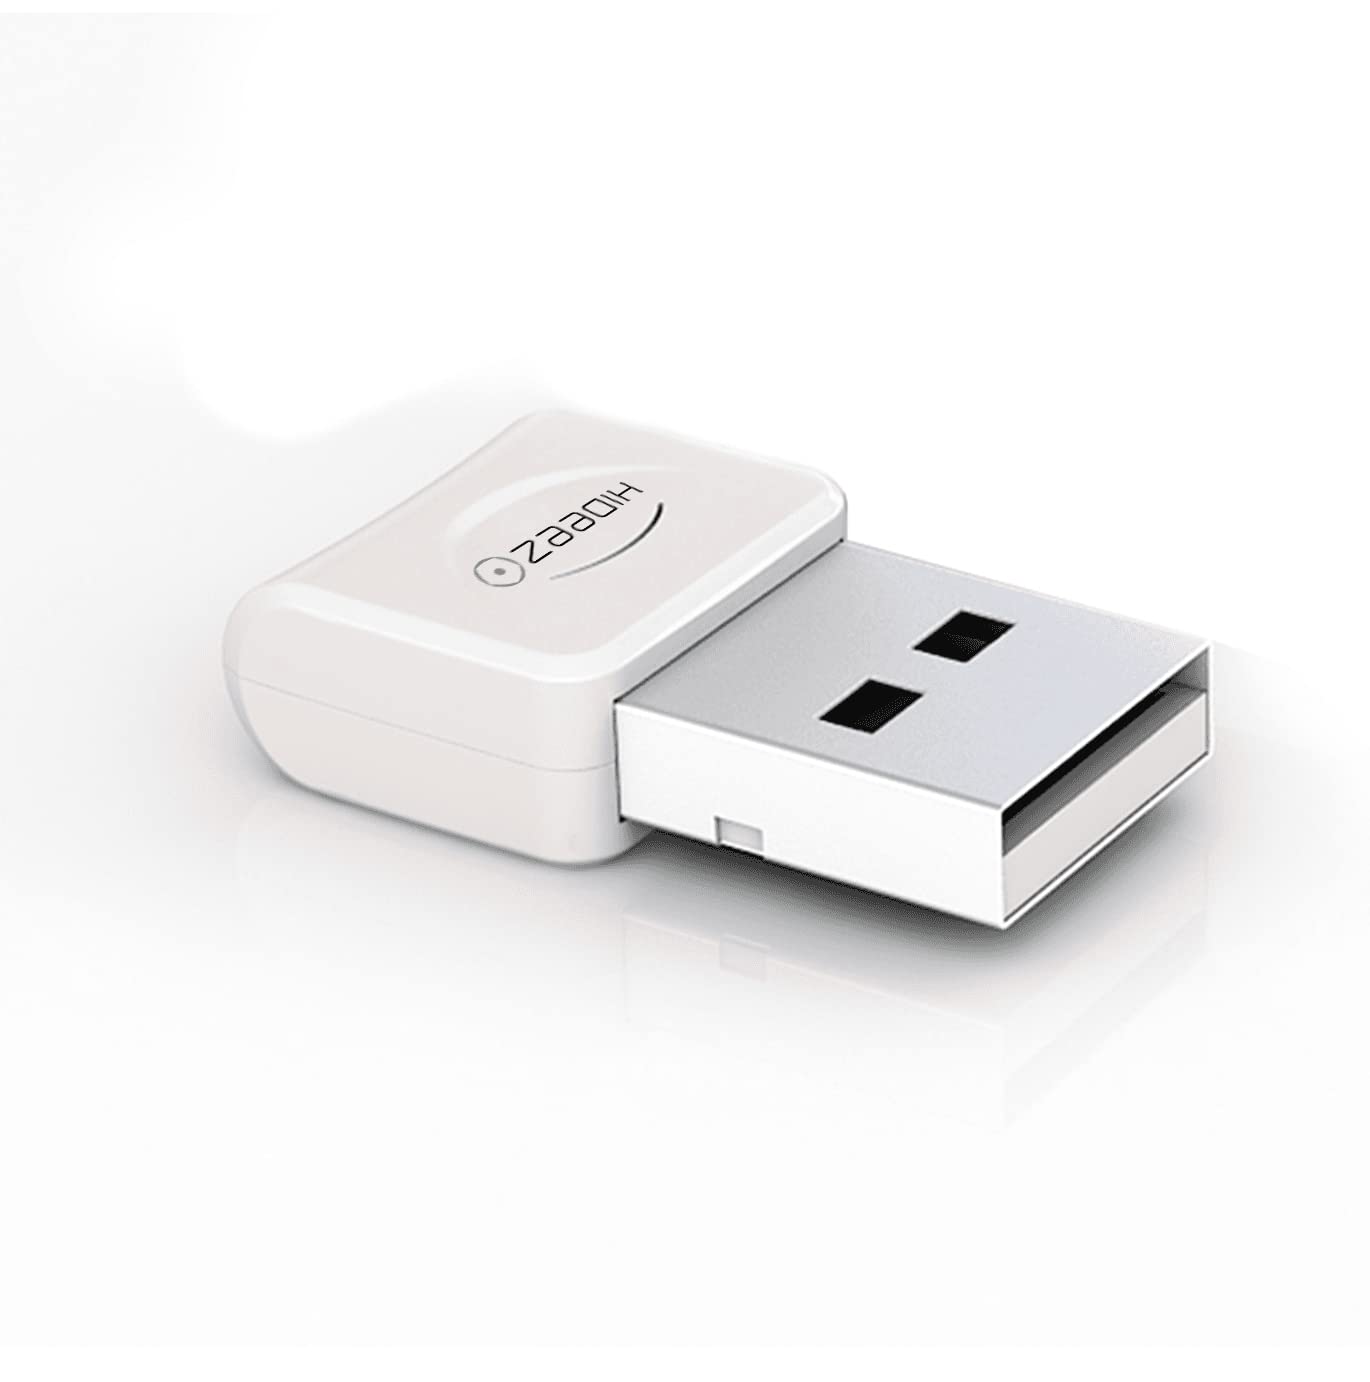 Purchase a USB Bluetooth dongle from a reputable retailer
Insert the USB dongle into an available USB port on the Mac